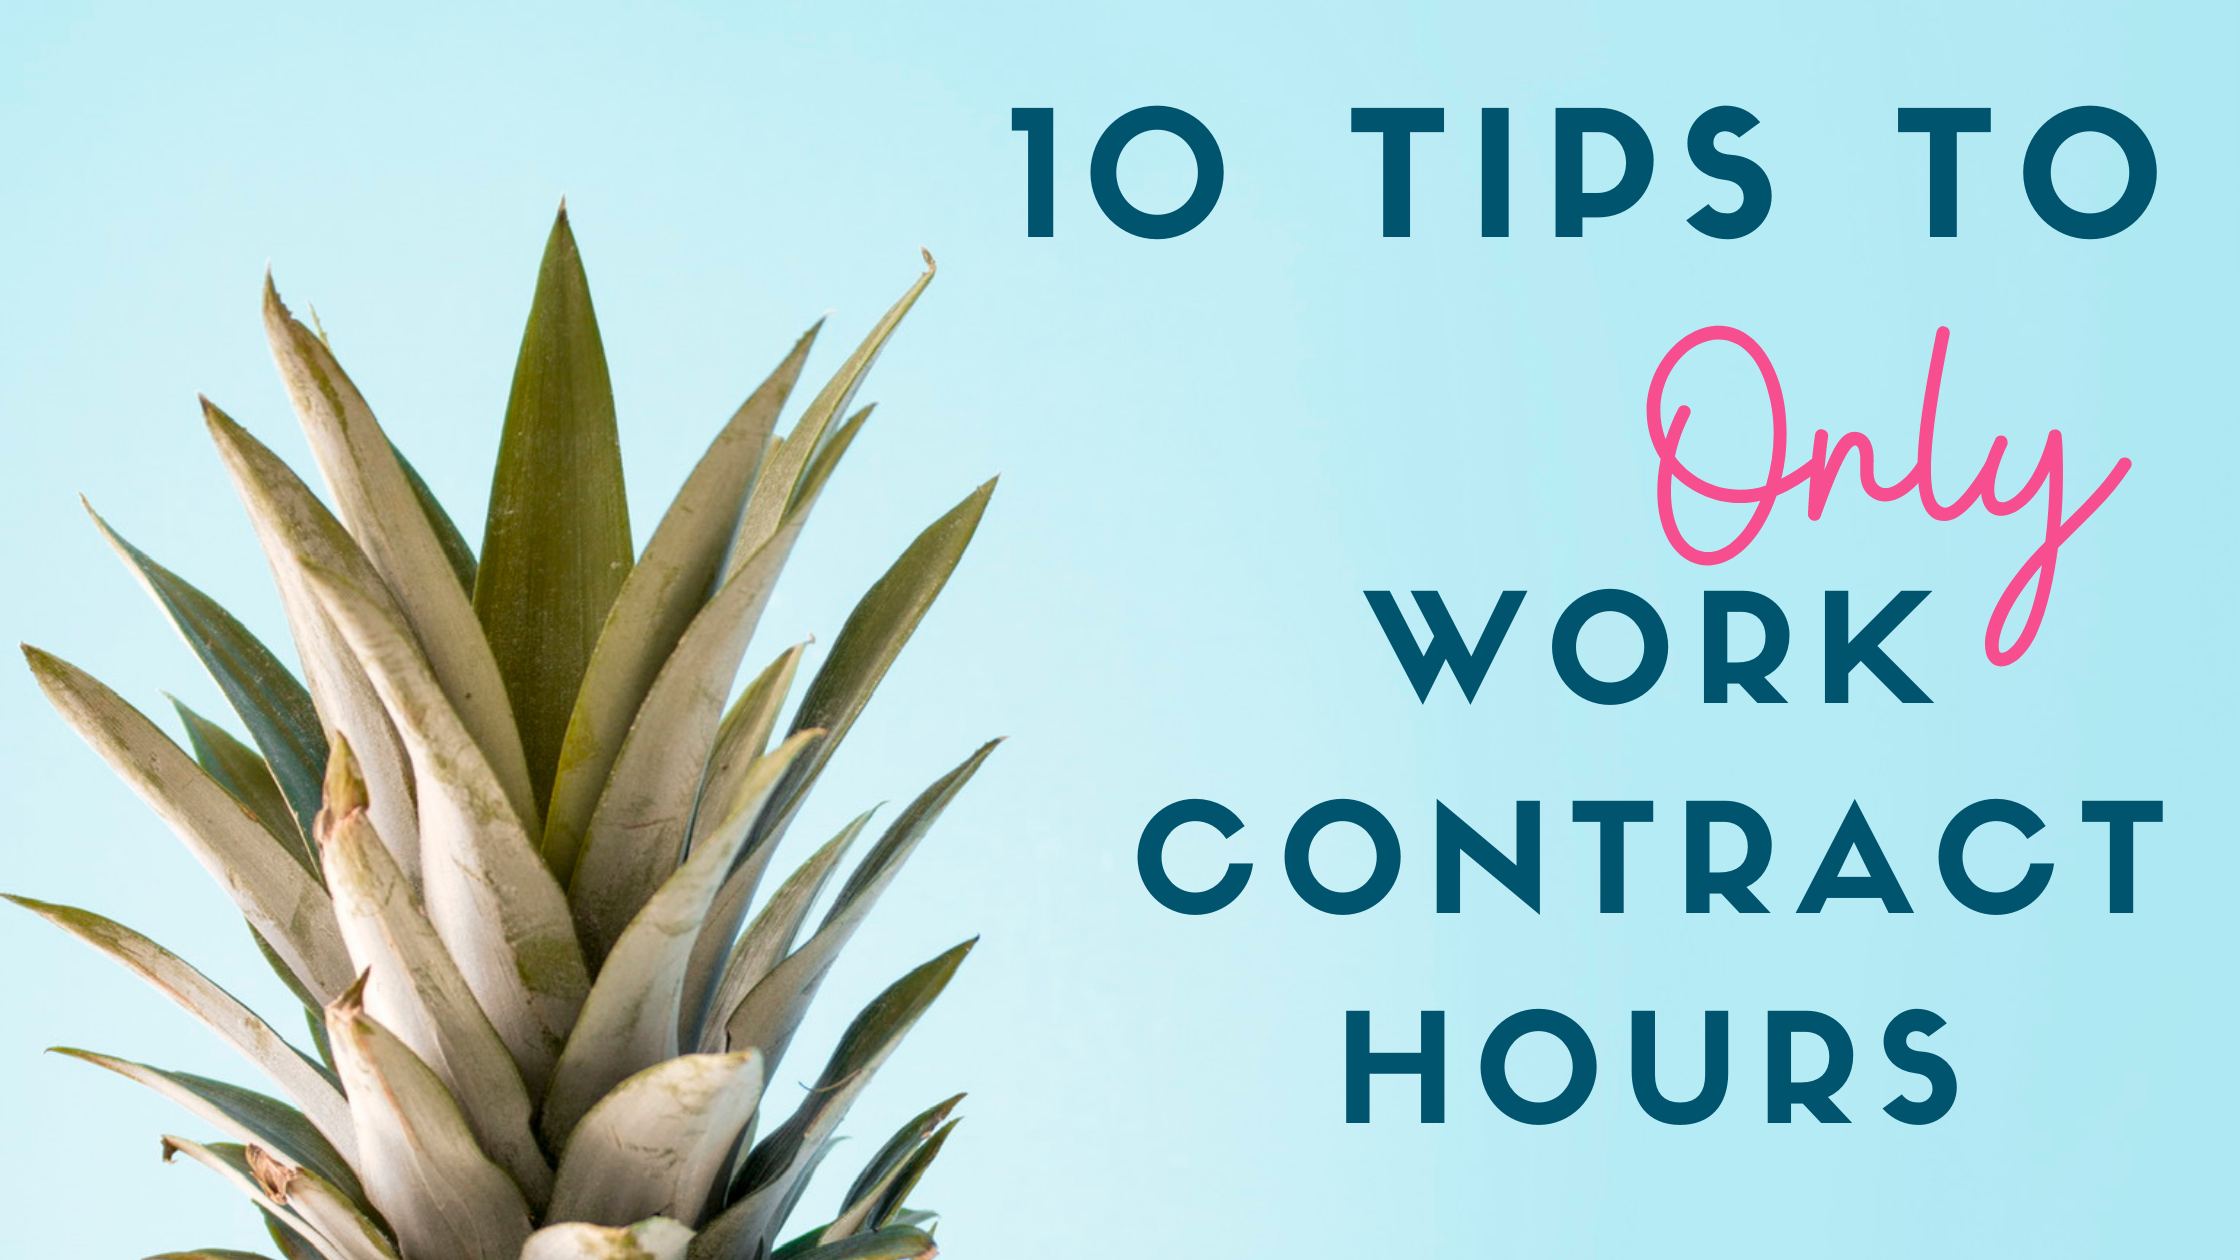 10 tips to only work contract hours